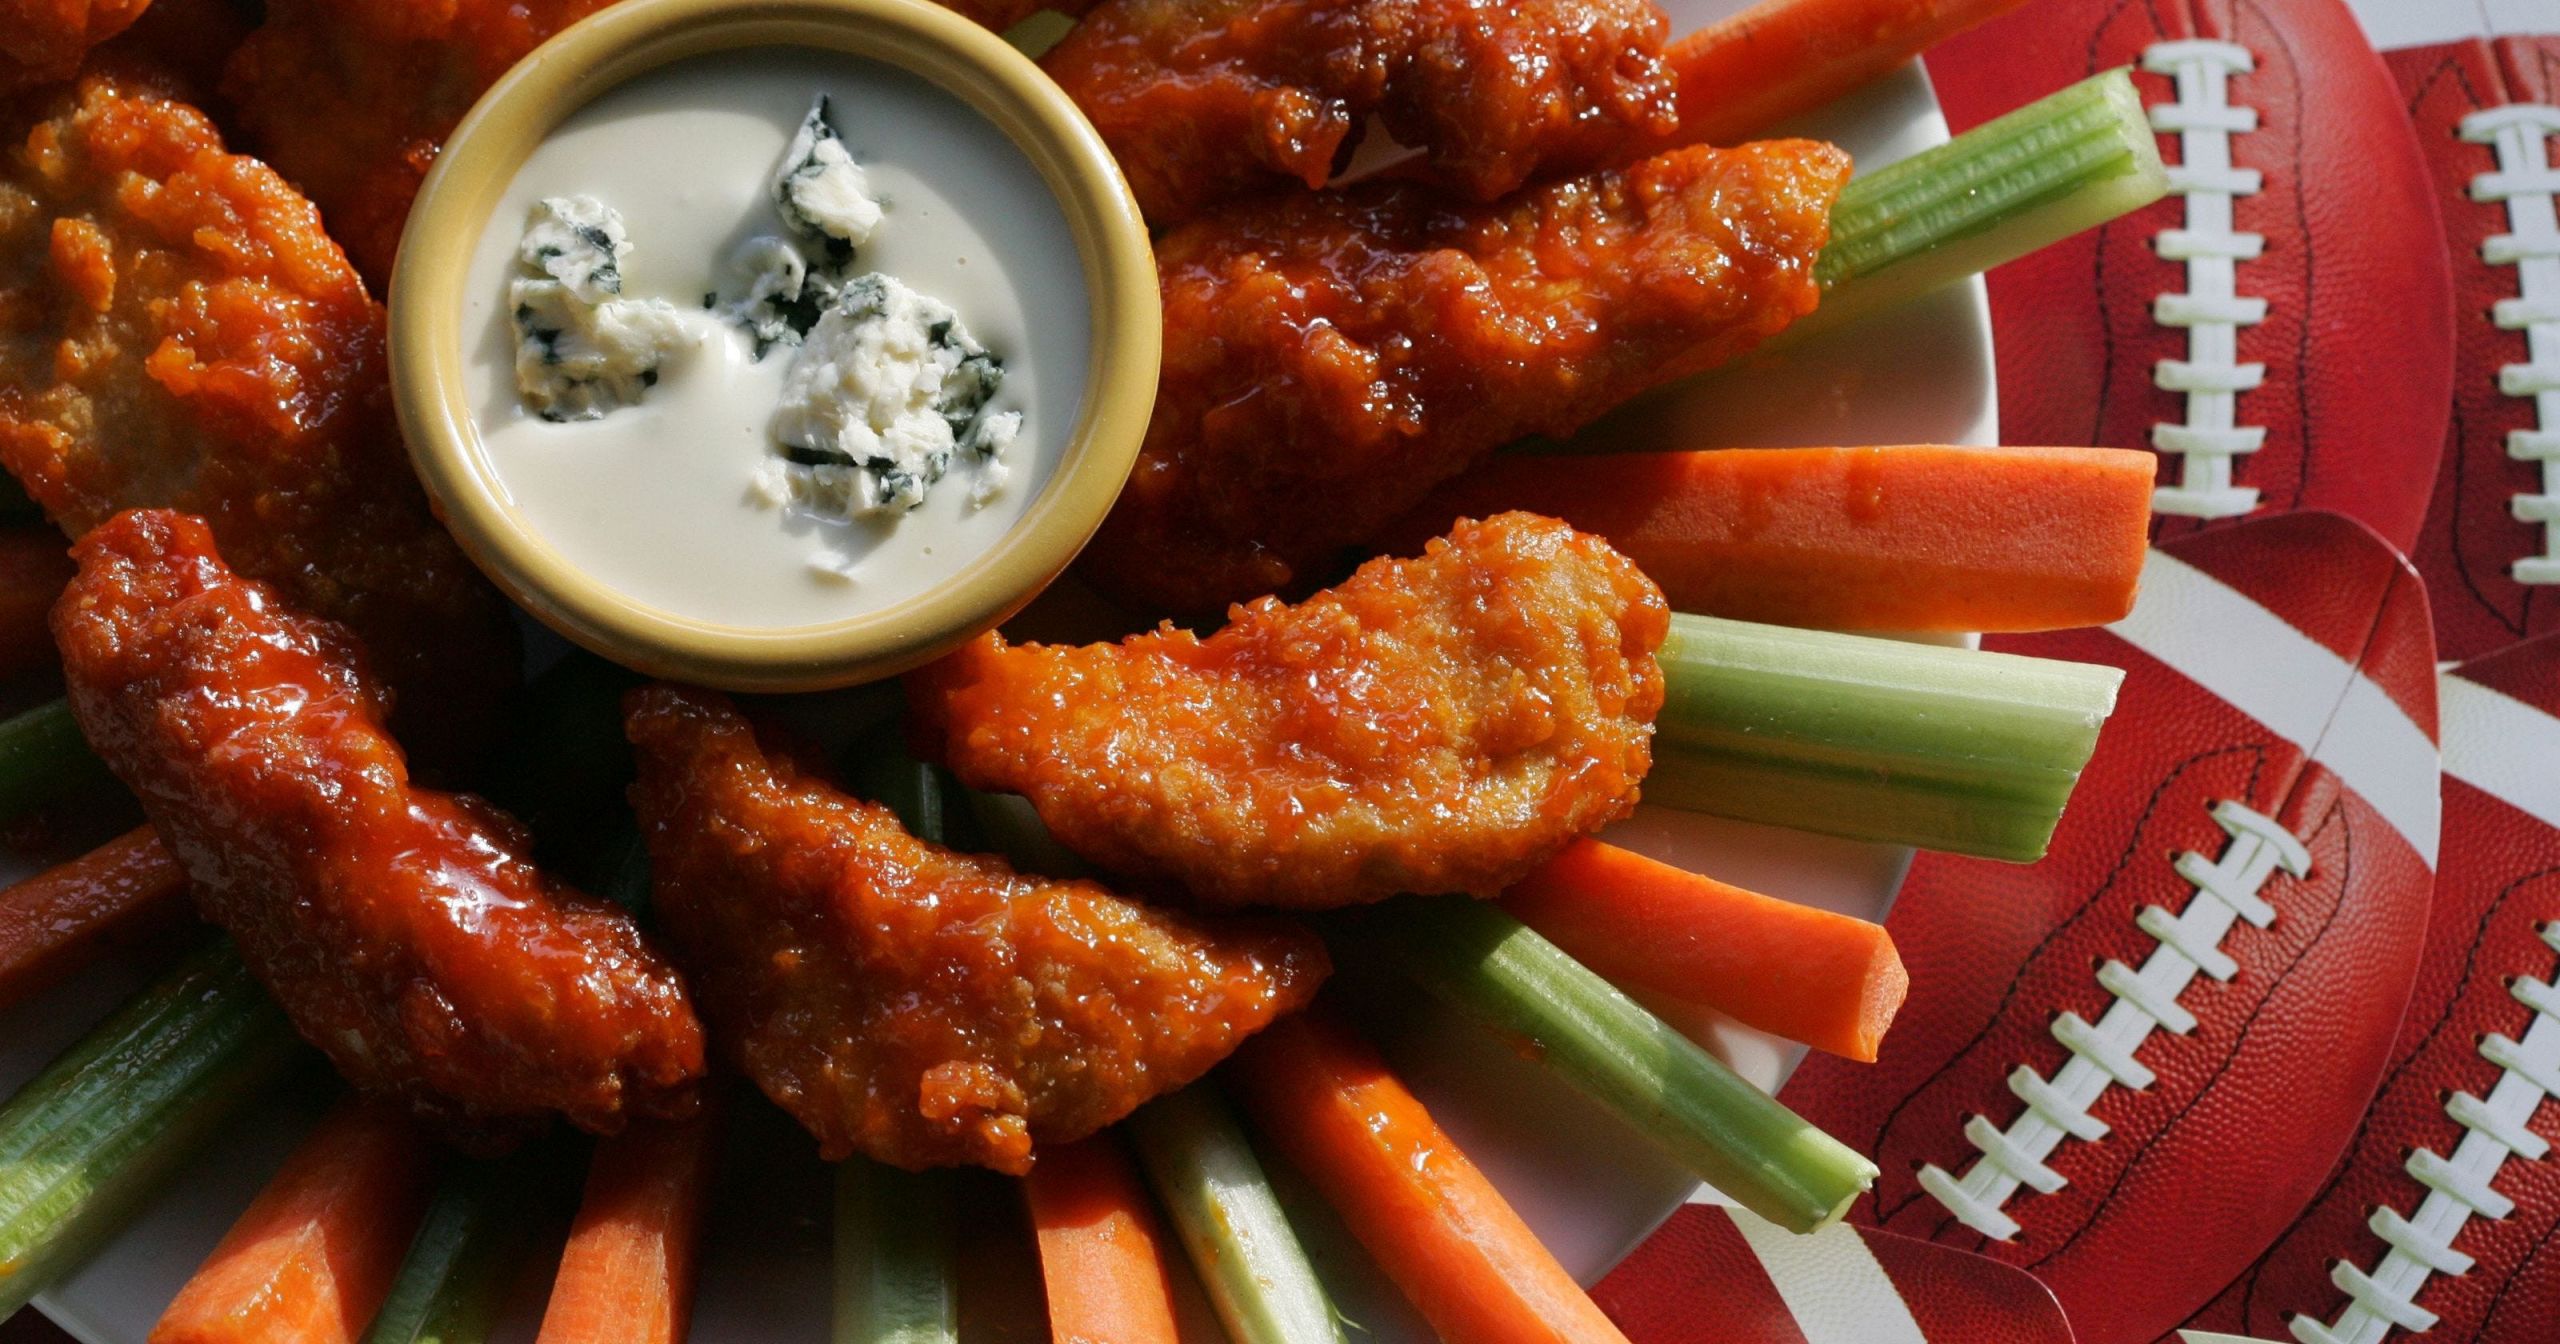 Chicken Super Bowl Recipes
 3 chicken wing recipes your Super Bowl guests will love